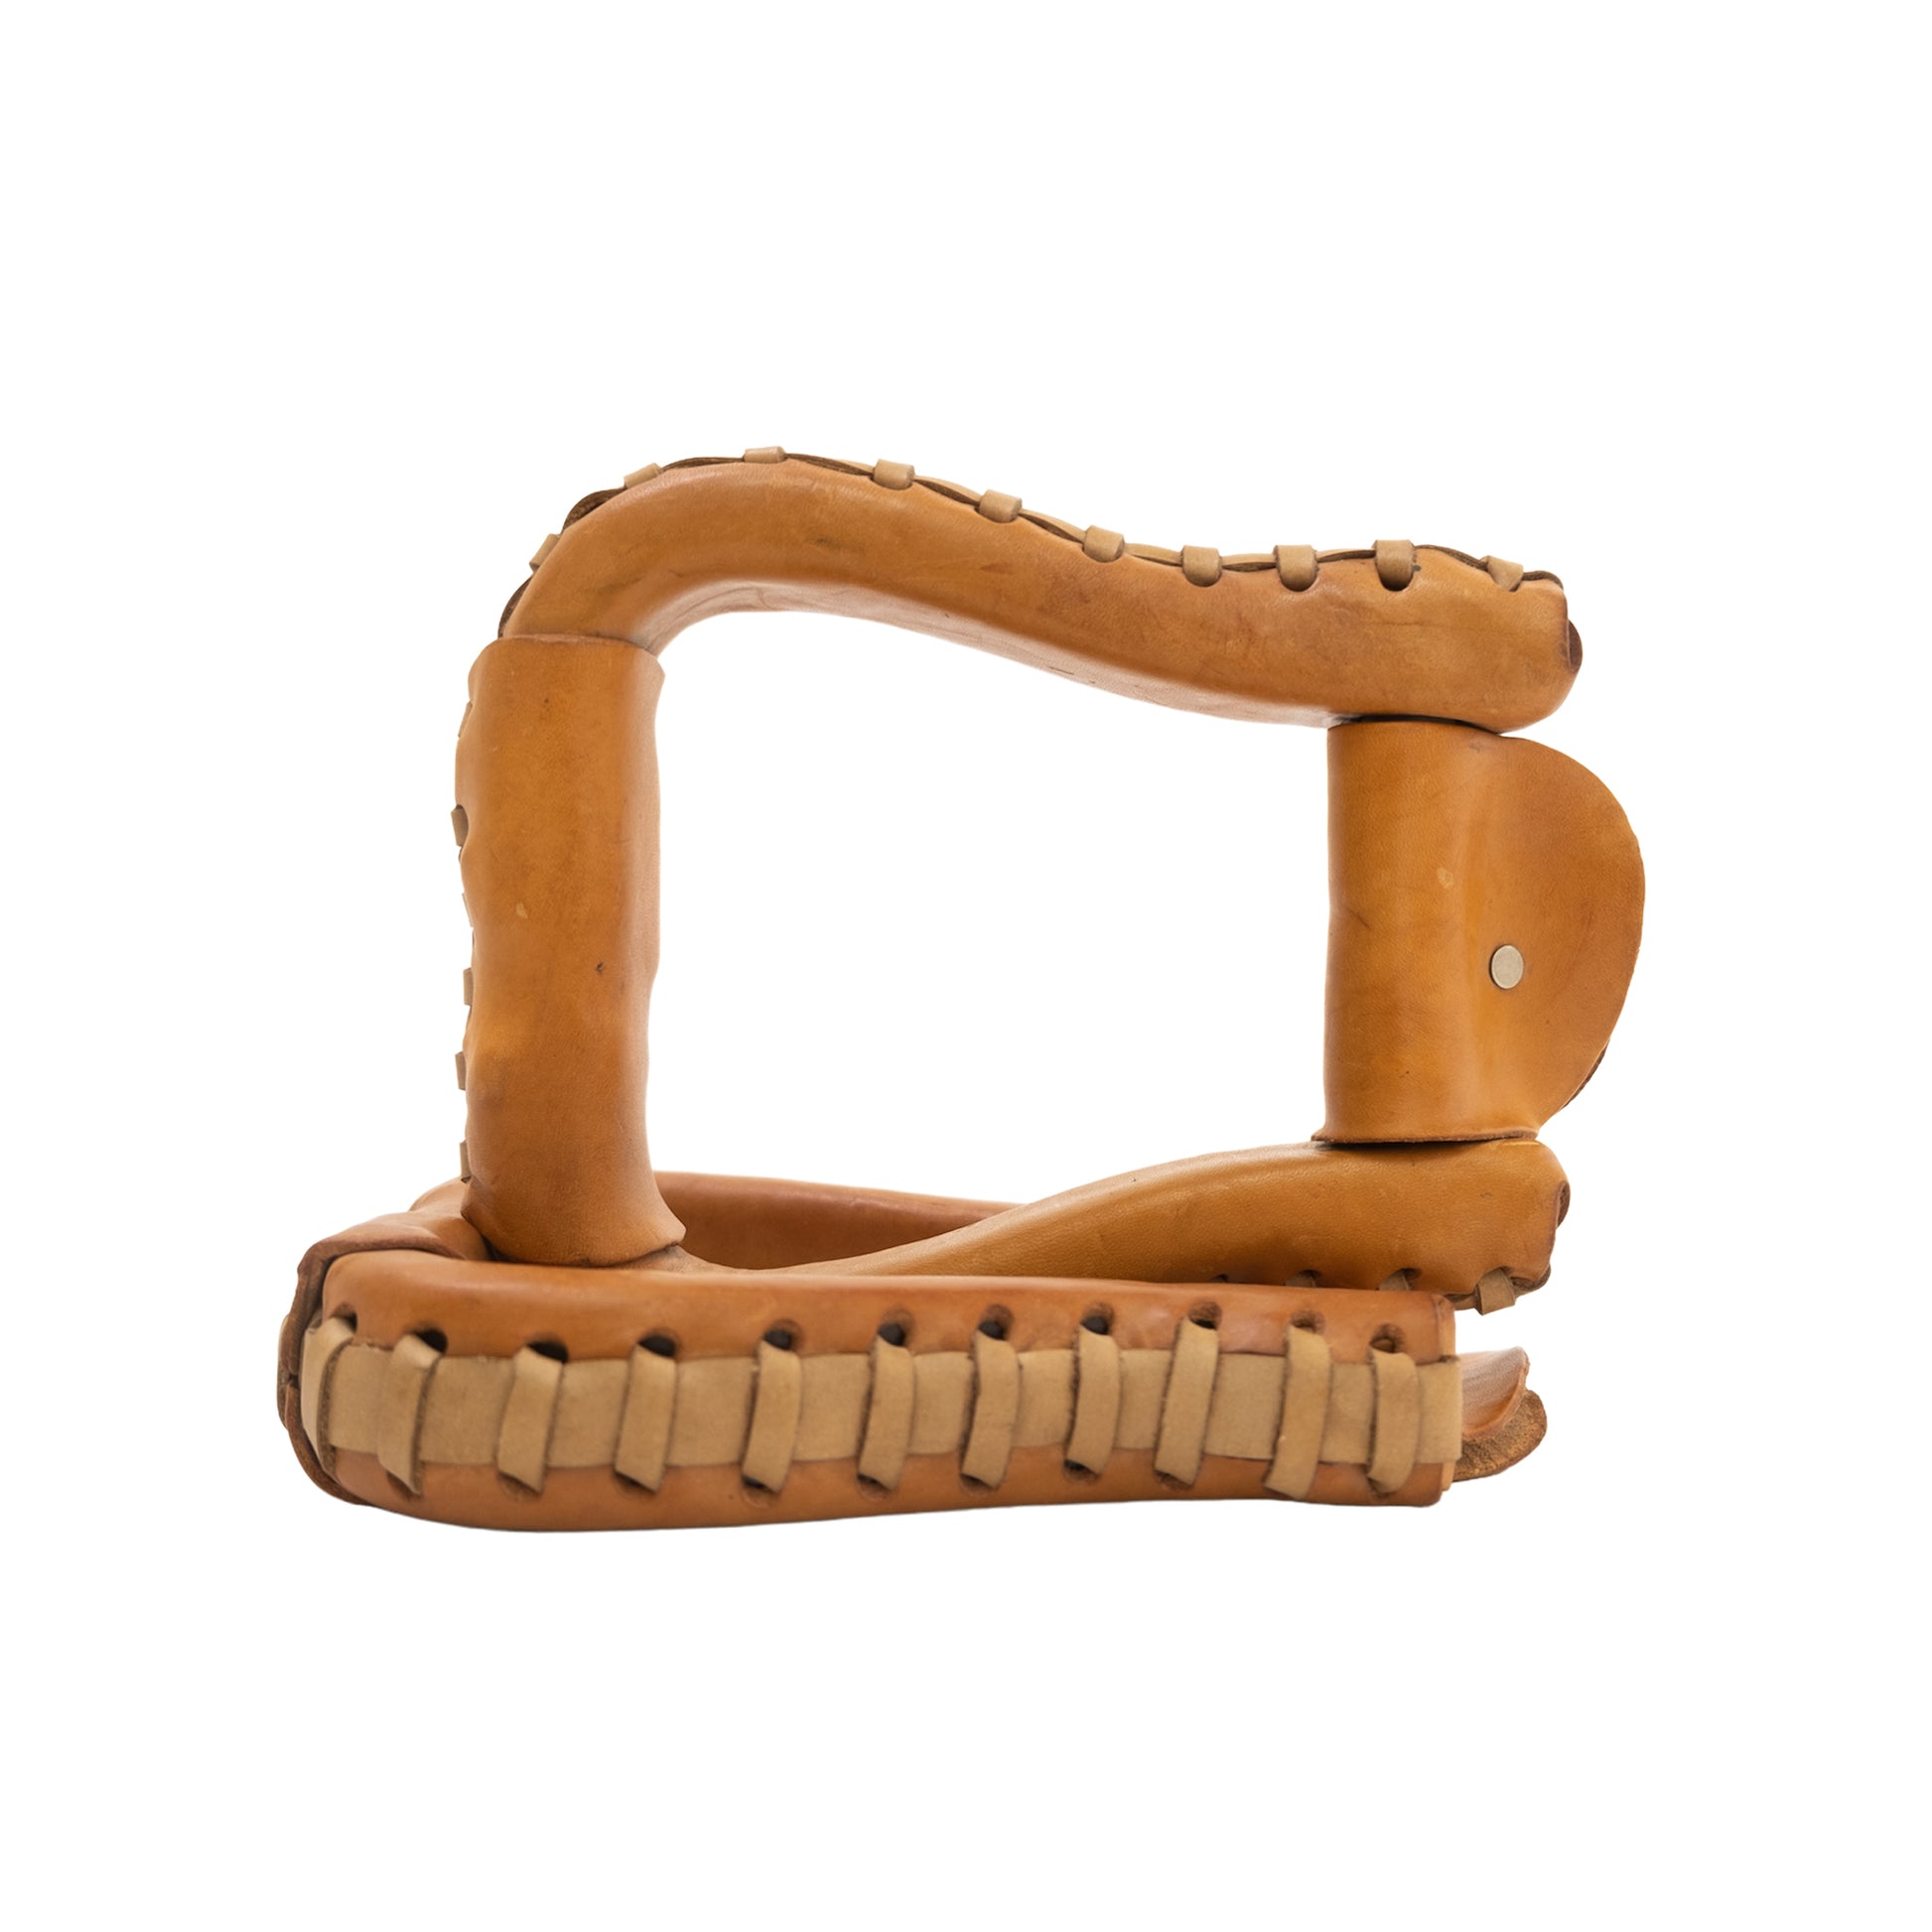 1-1/2" Stirrups rahlide contest harness leather covered LL.